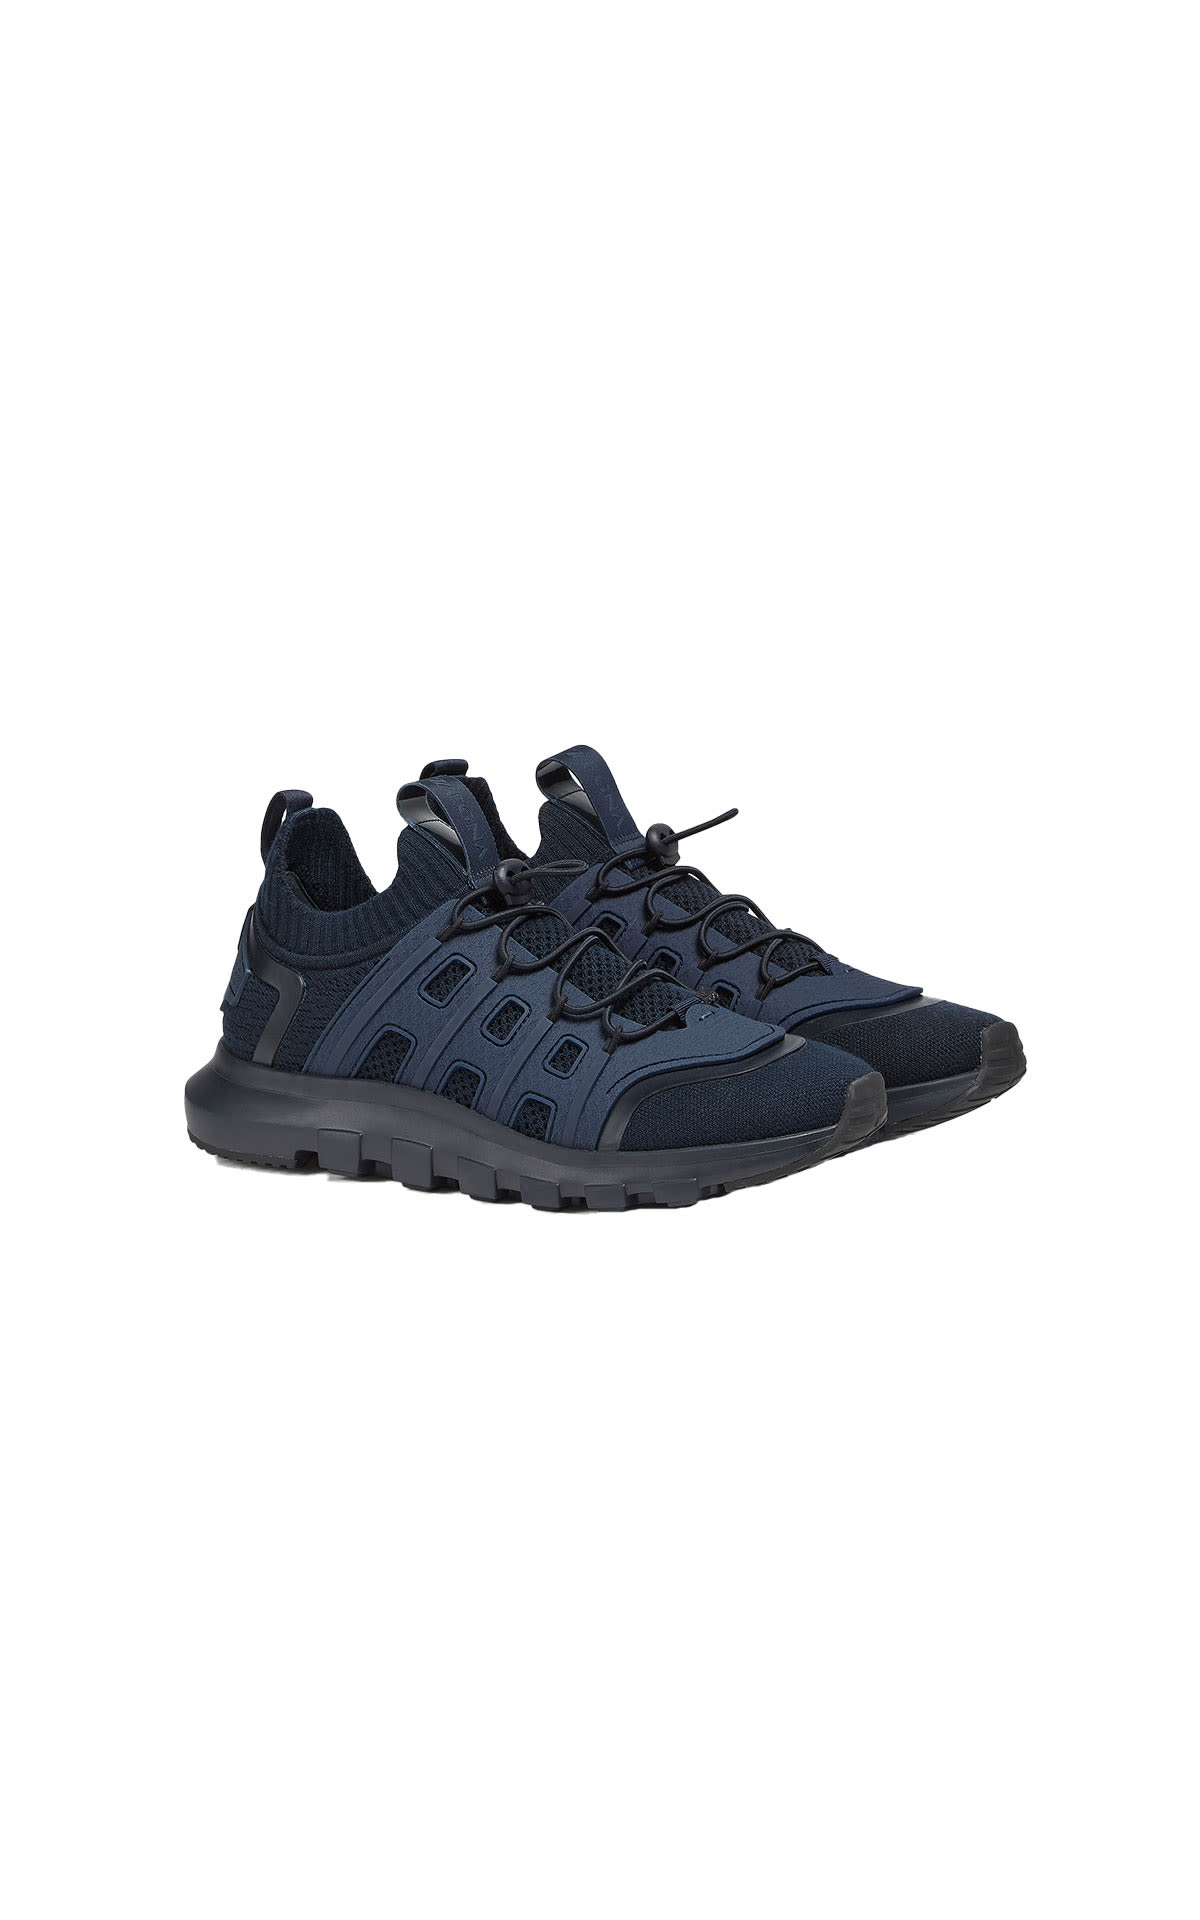 Zegna Tech merino sneakers from Bicester Village